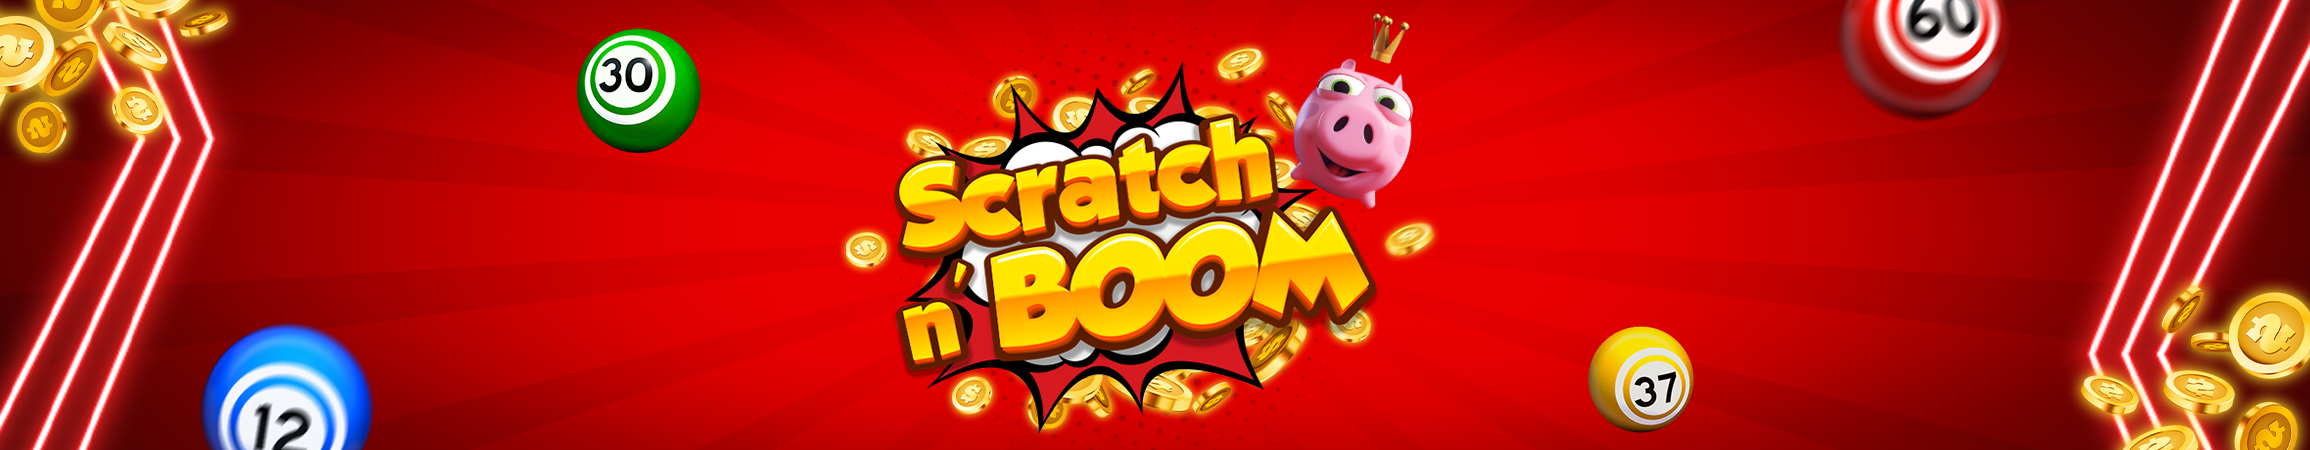 Scratch N’ Boom is back! Scratch your way to bigger prizes